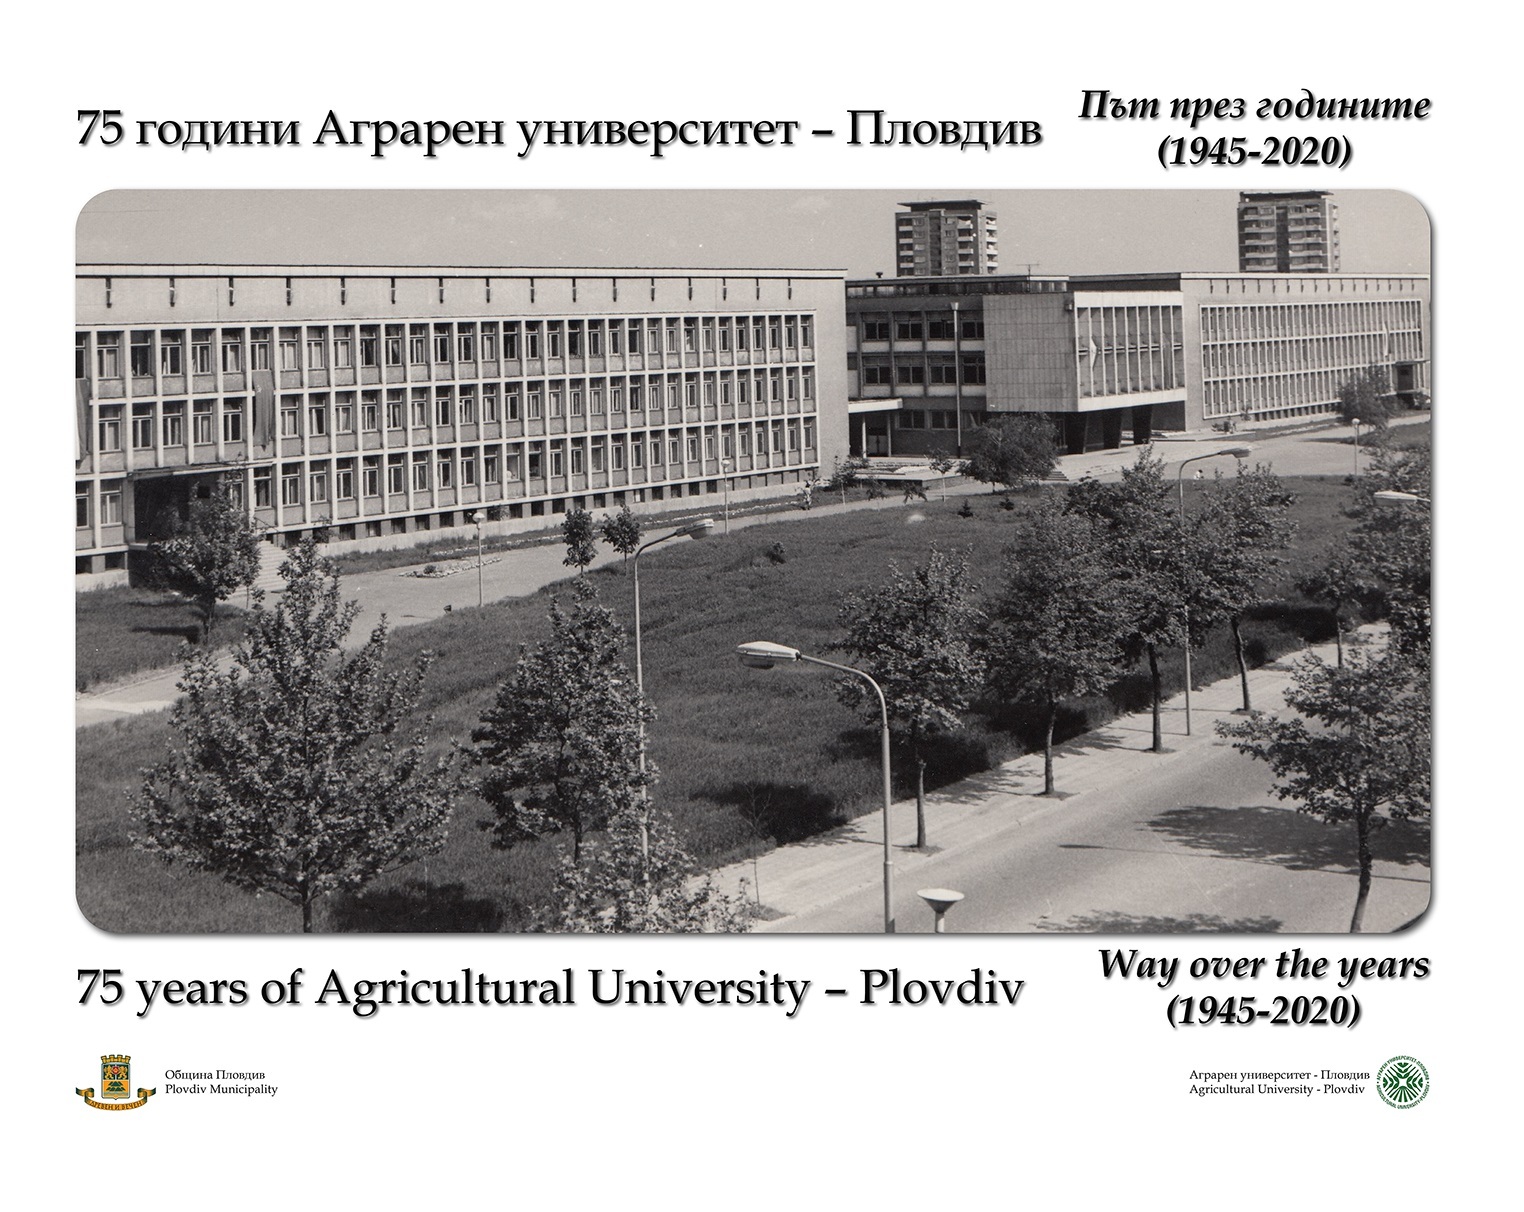 A PHOTO EXHIBITION, DEDICATED TO THE 75TH ANNIVERSARY OF AGRICULTURAL UNIVERSITY - PLOVDIV